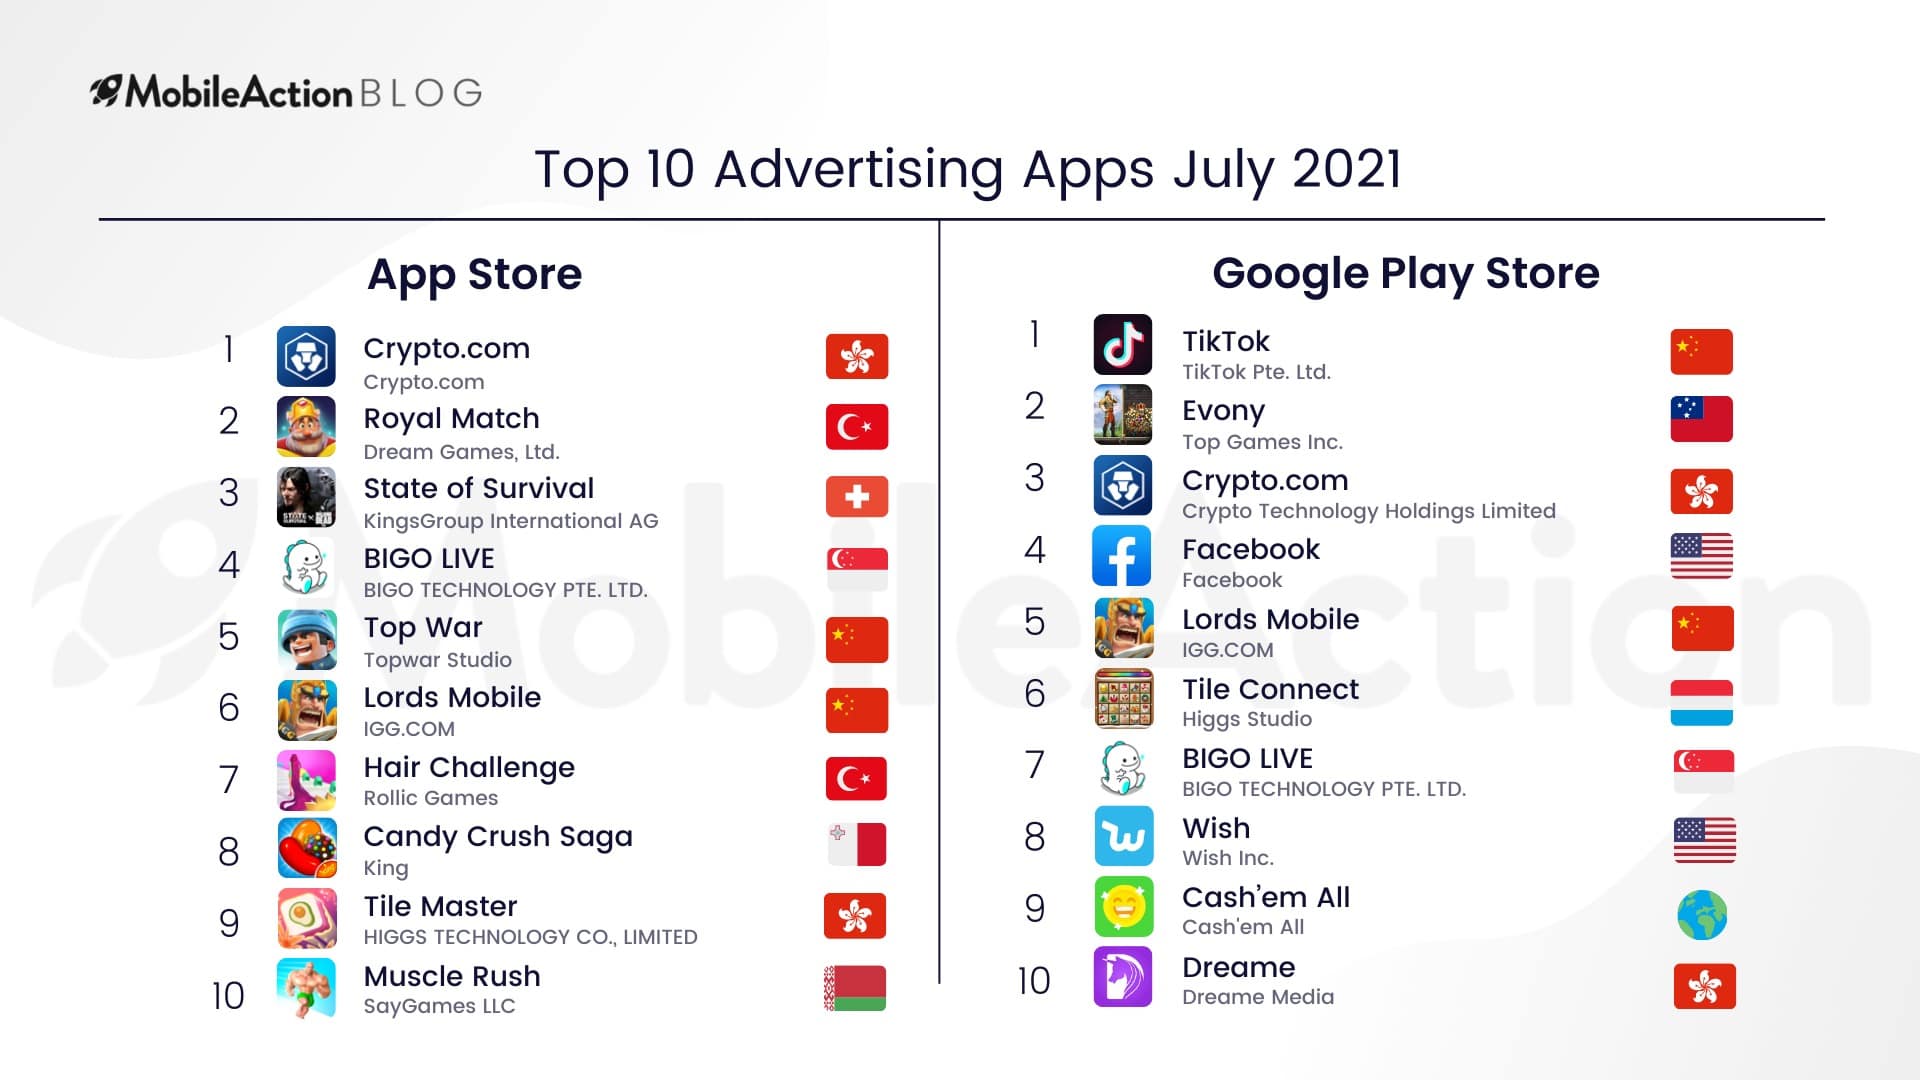 Top Advertising Apps of July 2021